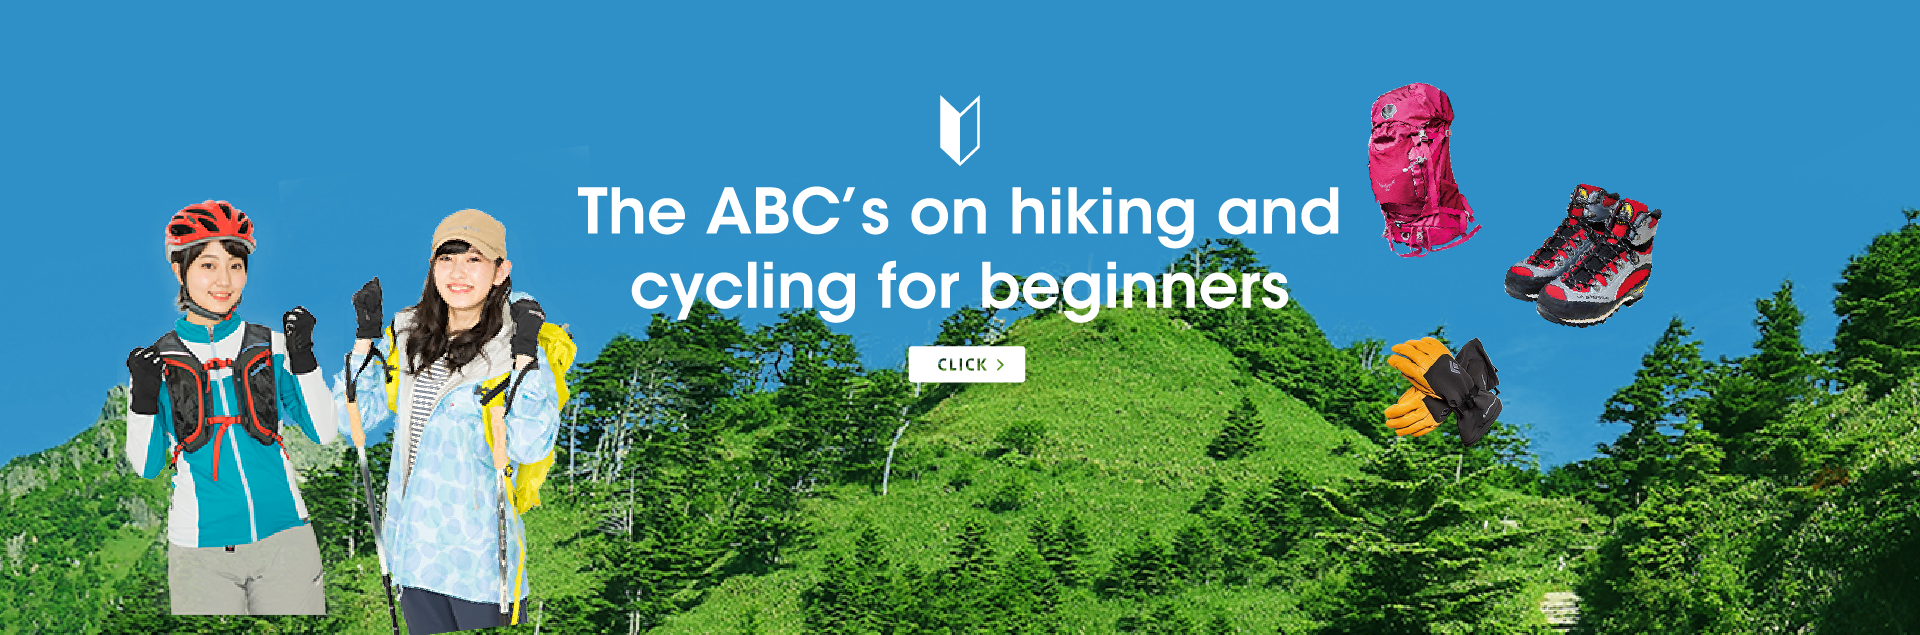 The ABC's on hiking and cycling for beginners